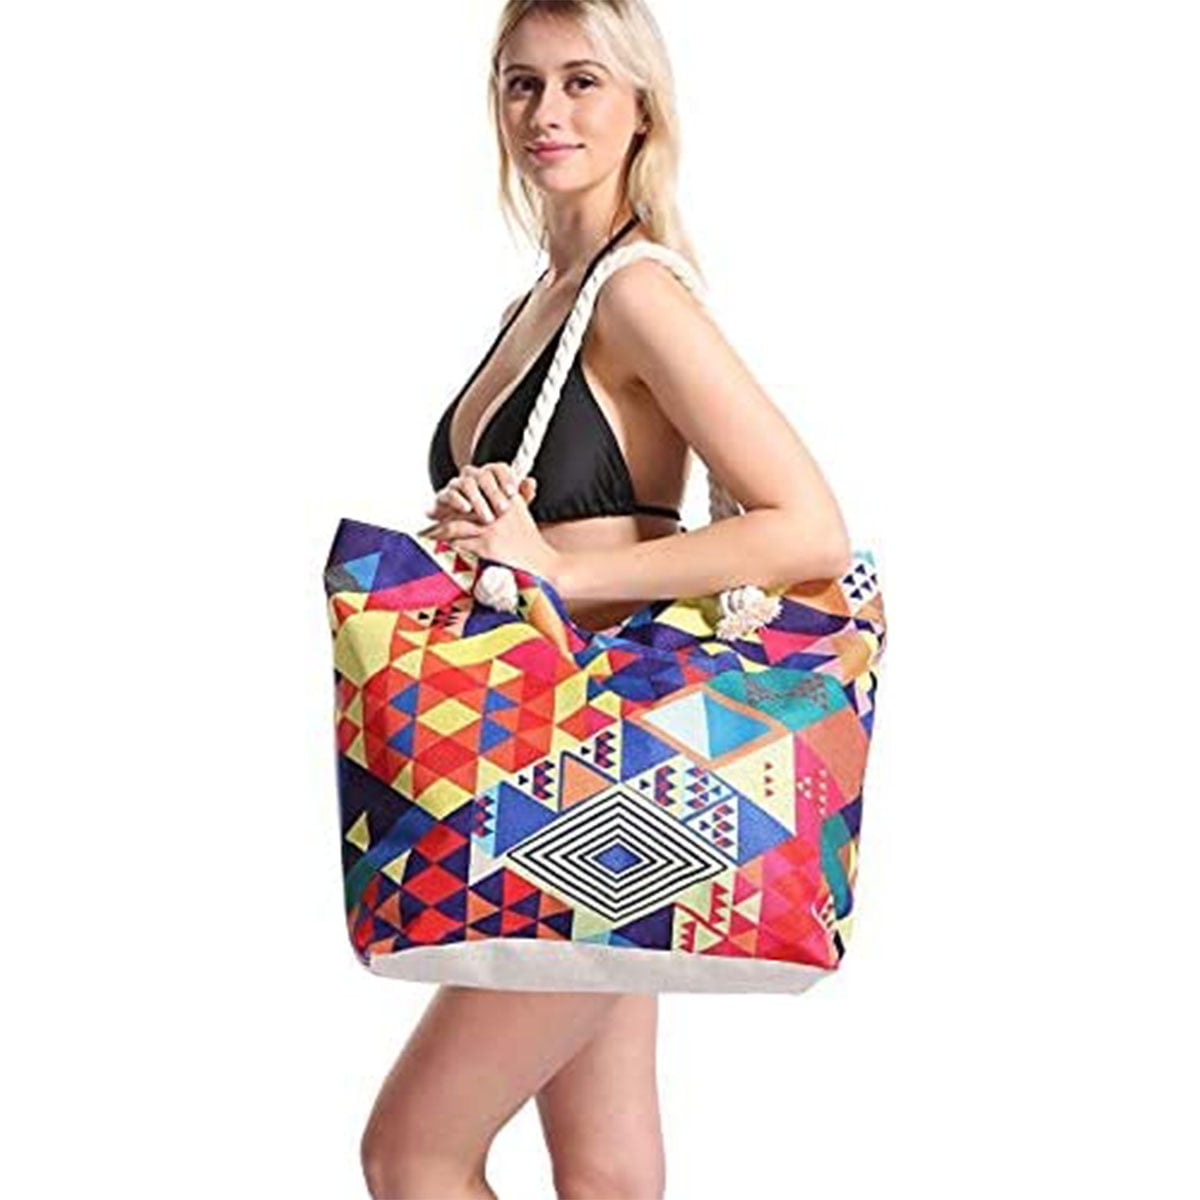 Women Large Beach Tote Bag with Zipper Inner Pockets Extra Big Utility Striped Black and White Canvas Shoulder Rope Handles Waterproof Swim Pool Gym Picnic Travel Holiday Weekender Fashion Accessories 